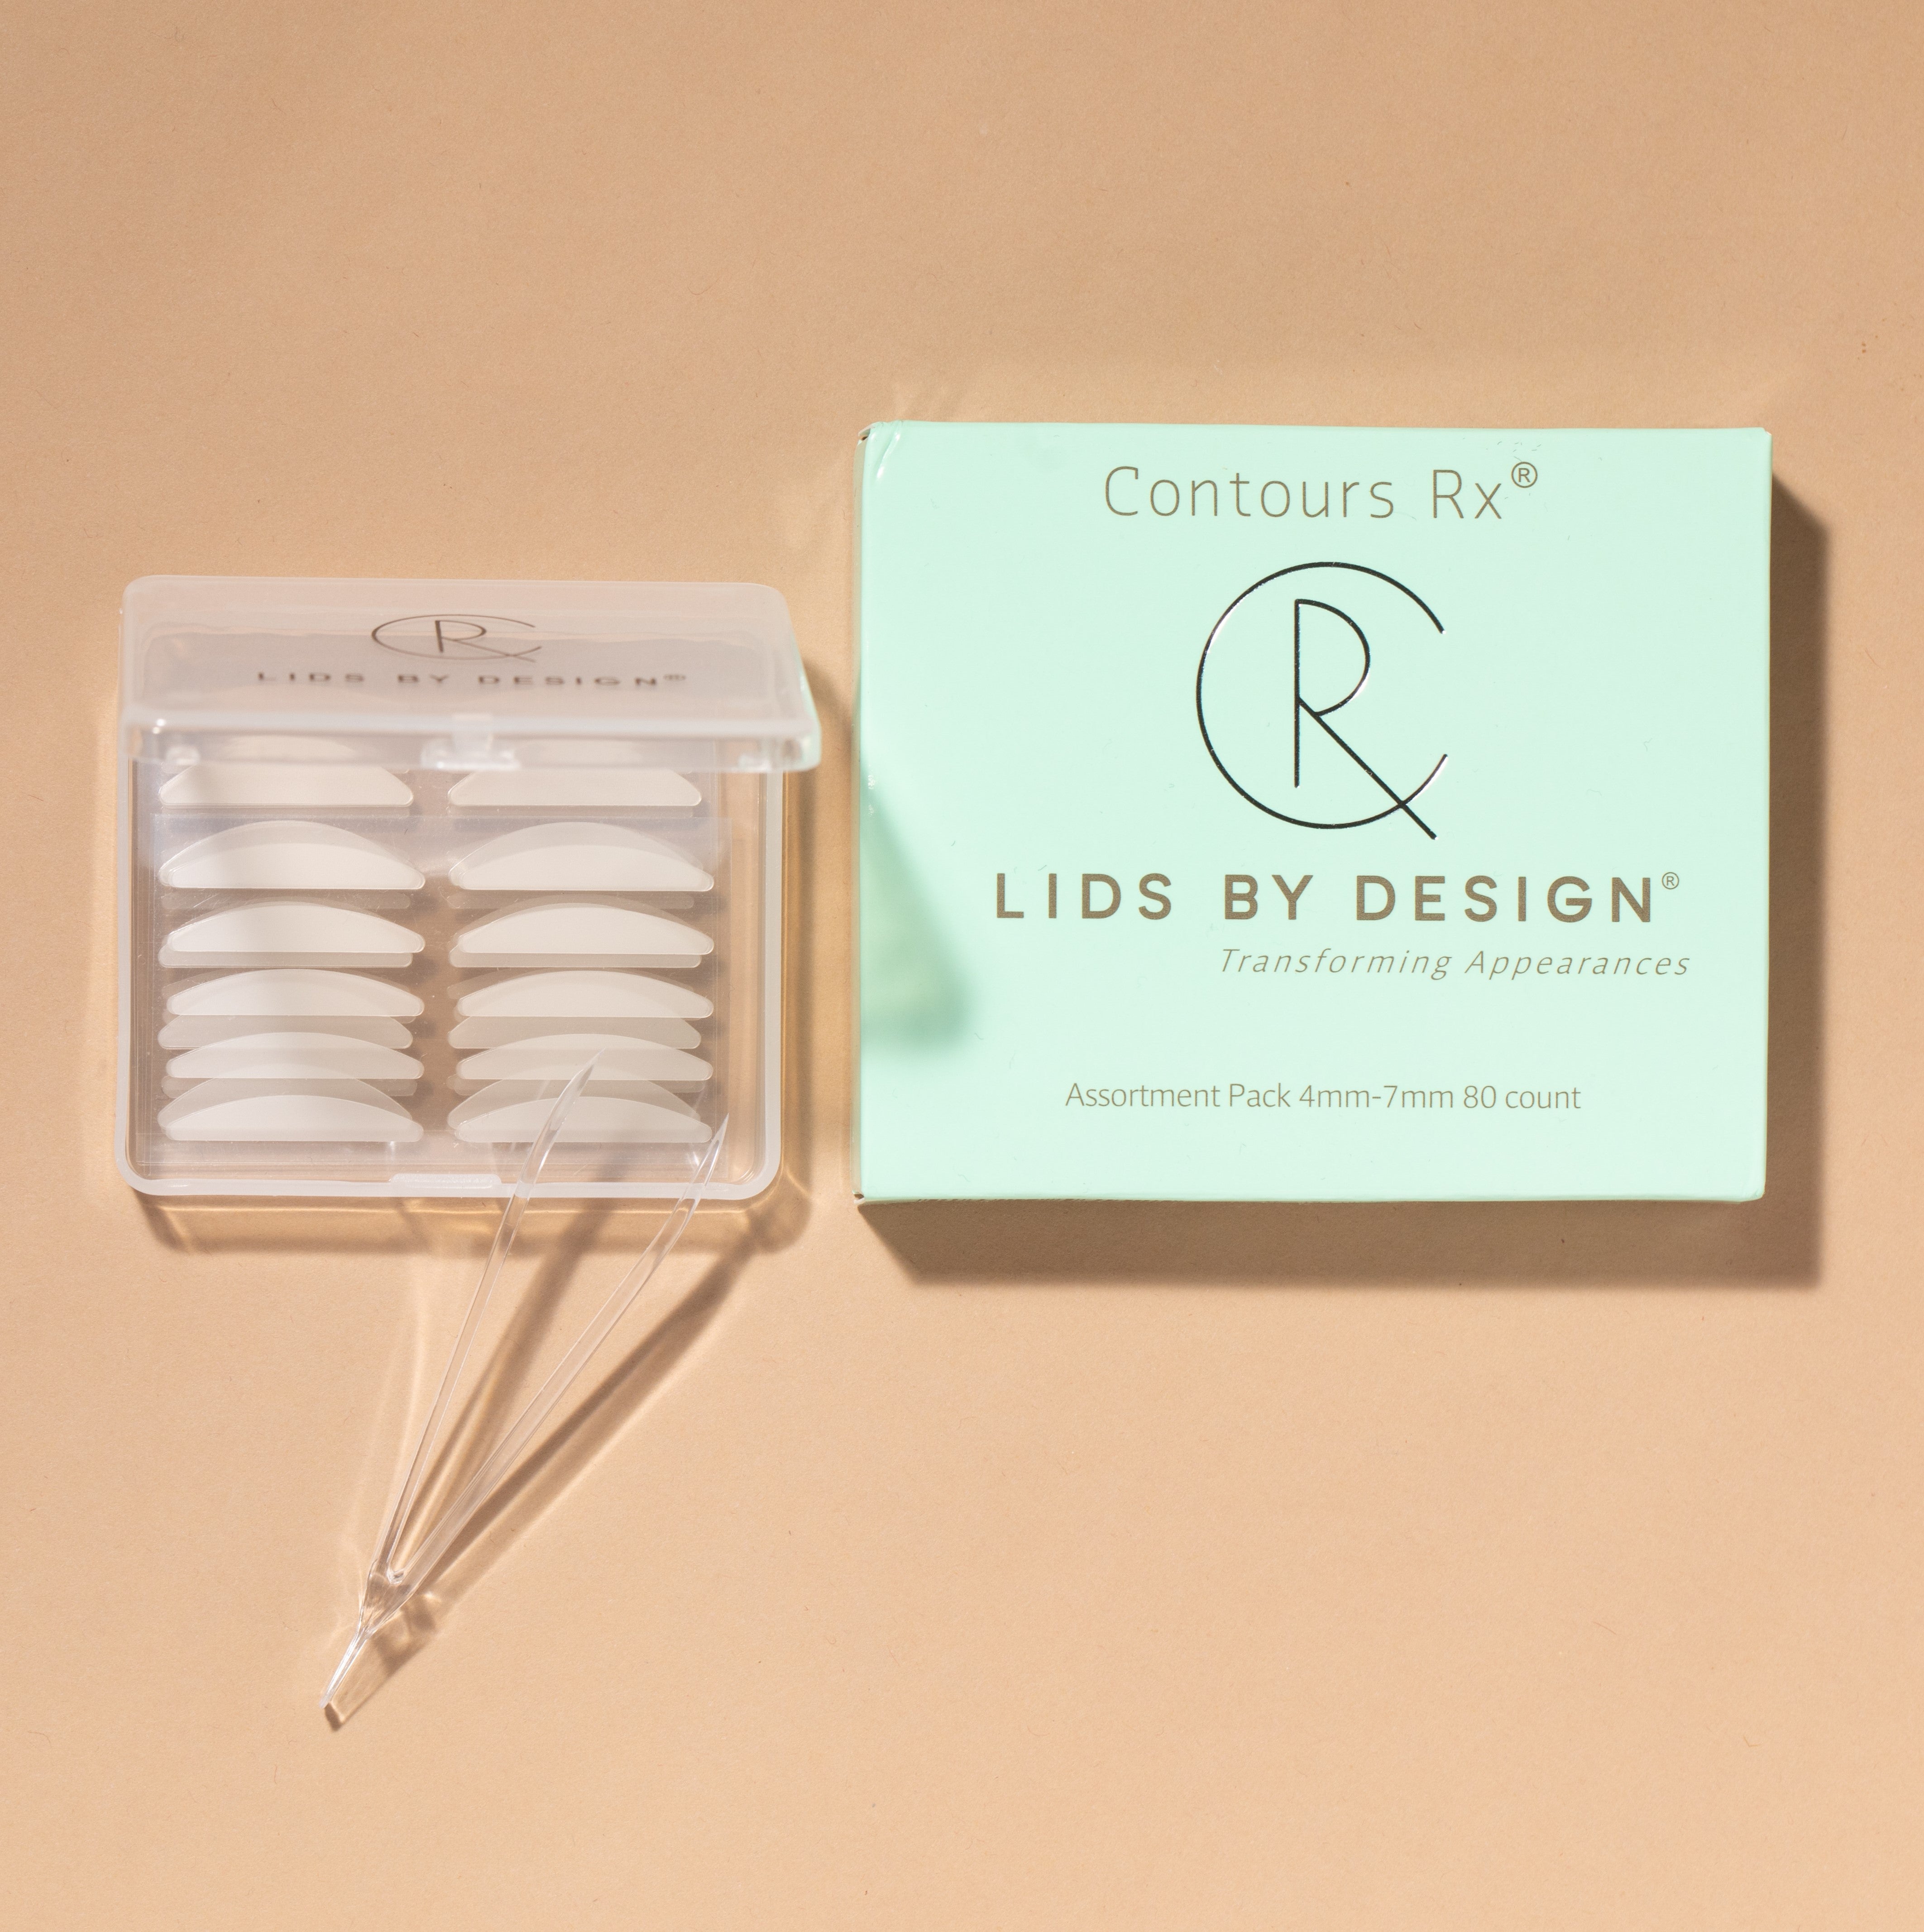 LIDS BY DESIGN By Contours Rx by Britain ContoursRx - Issuu